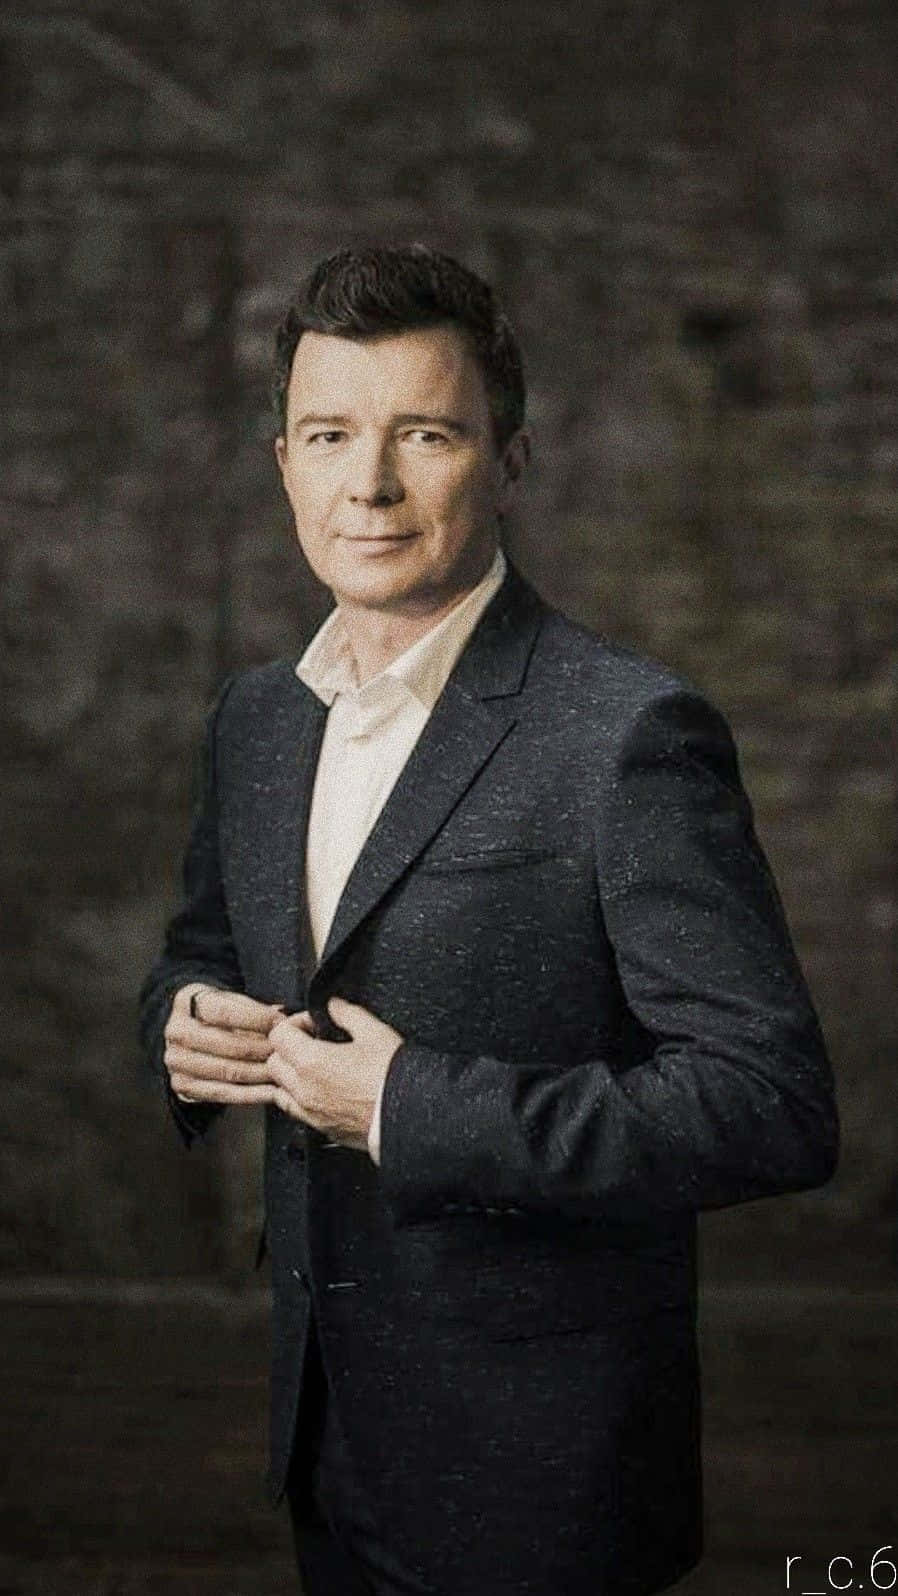 English Musician Rick Astley Performing On Stage